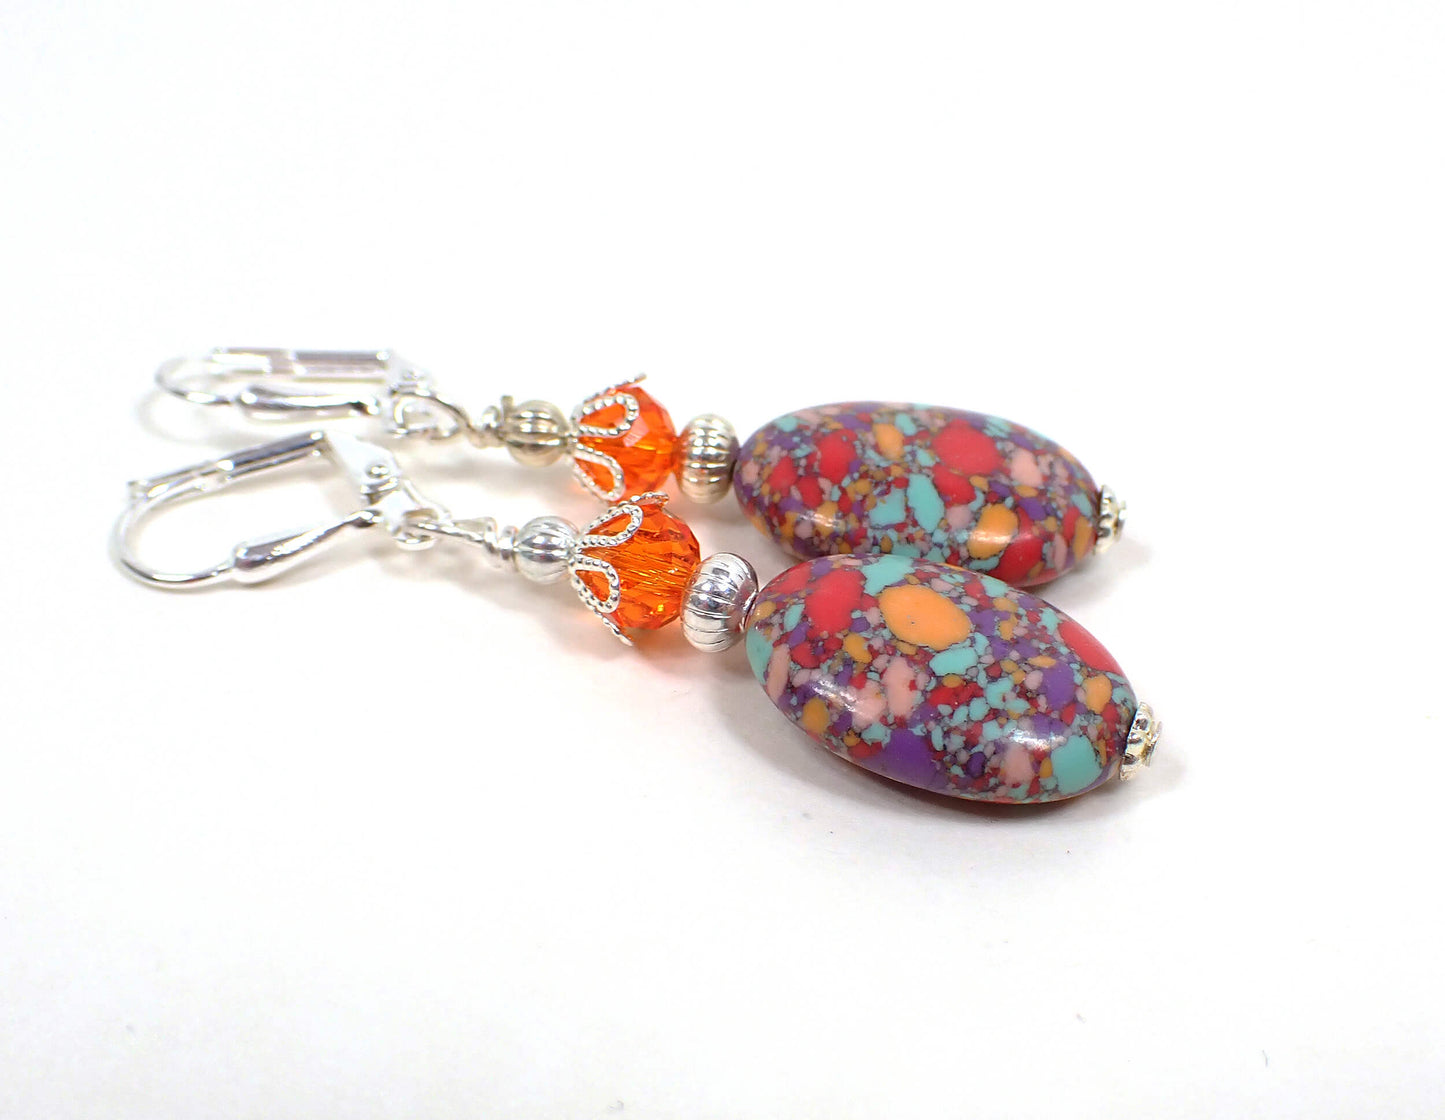 Multi Color Rainbow Resin Handmade Oval Drop Earrings, Silver Plated Hook Lever Back or Clip On